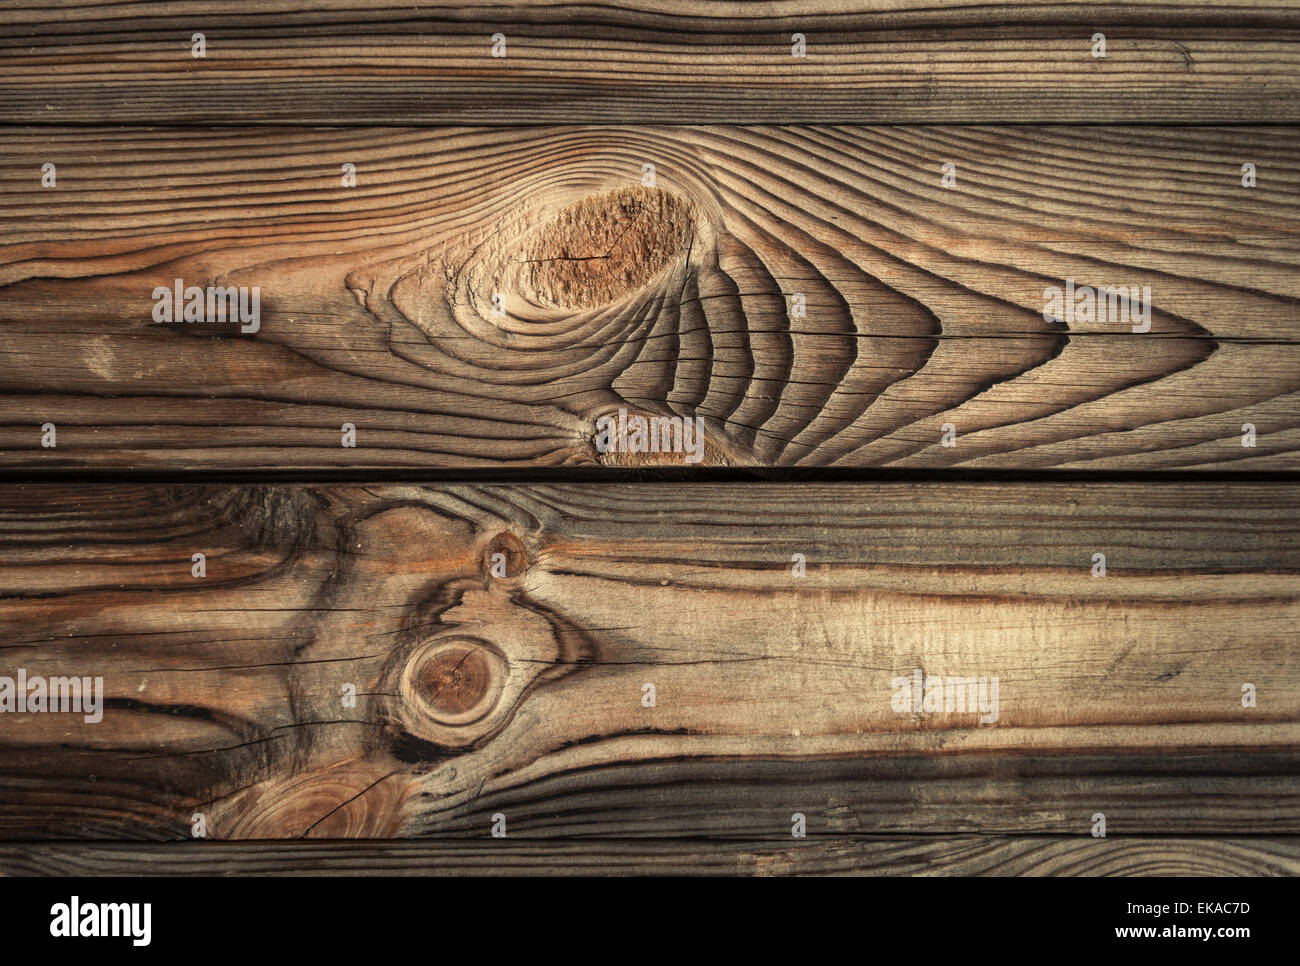 old wood texture. background old panels Stock Photo